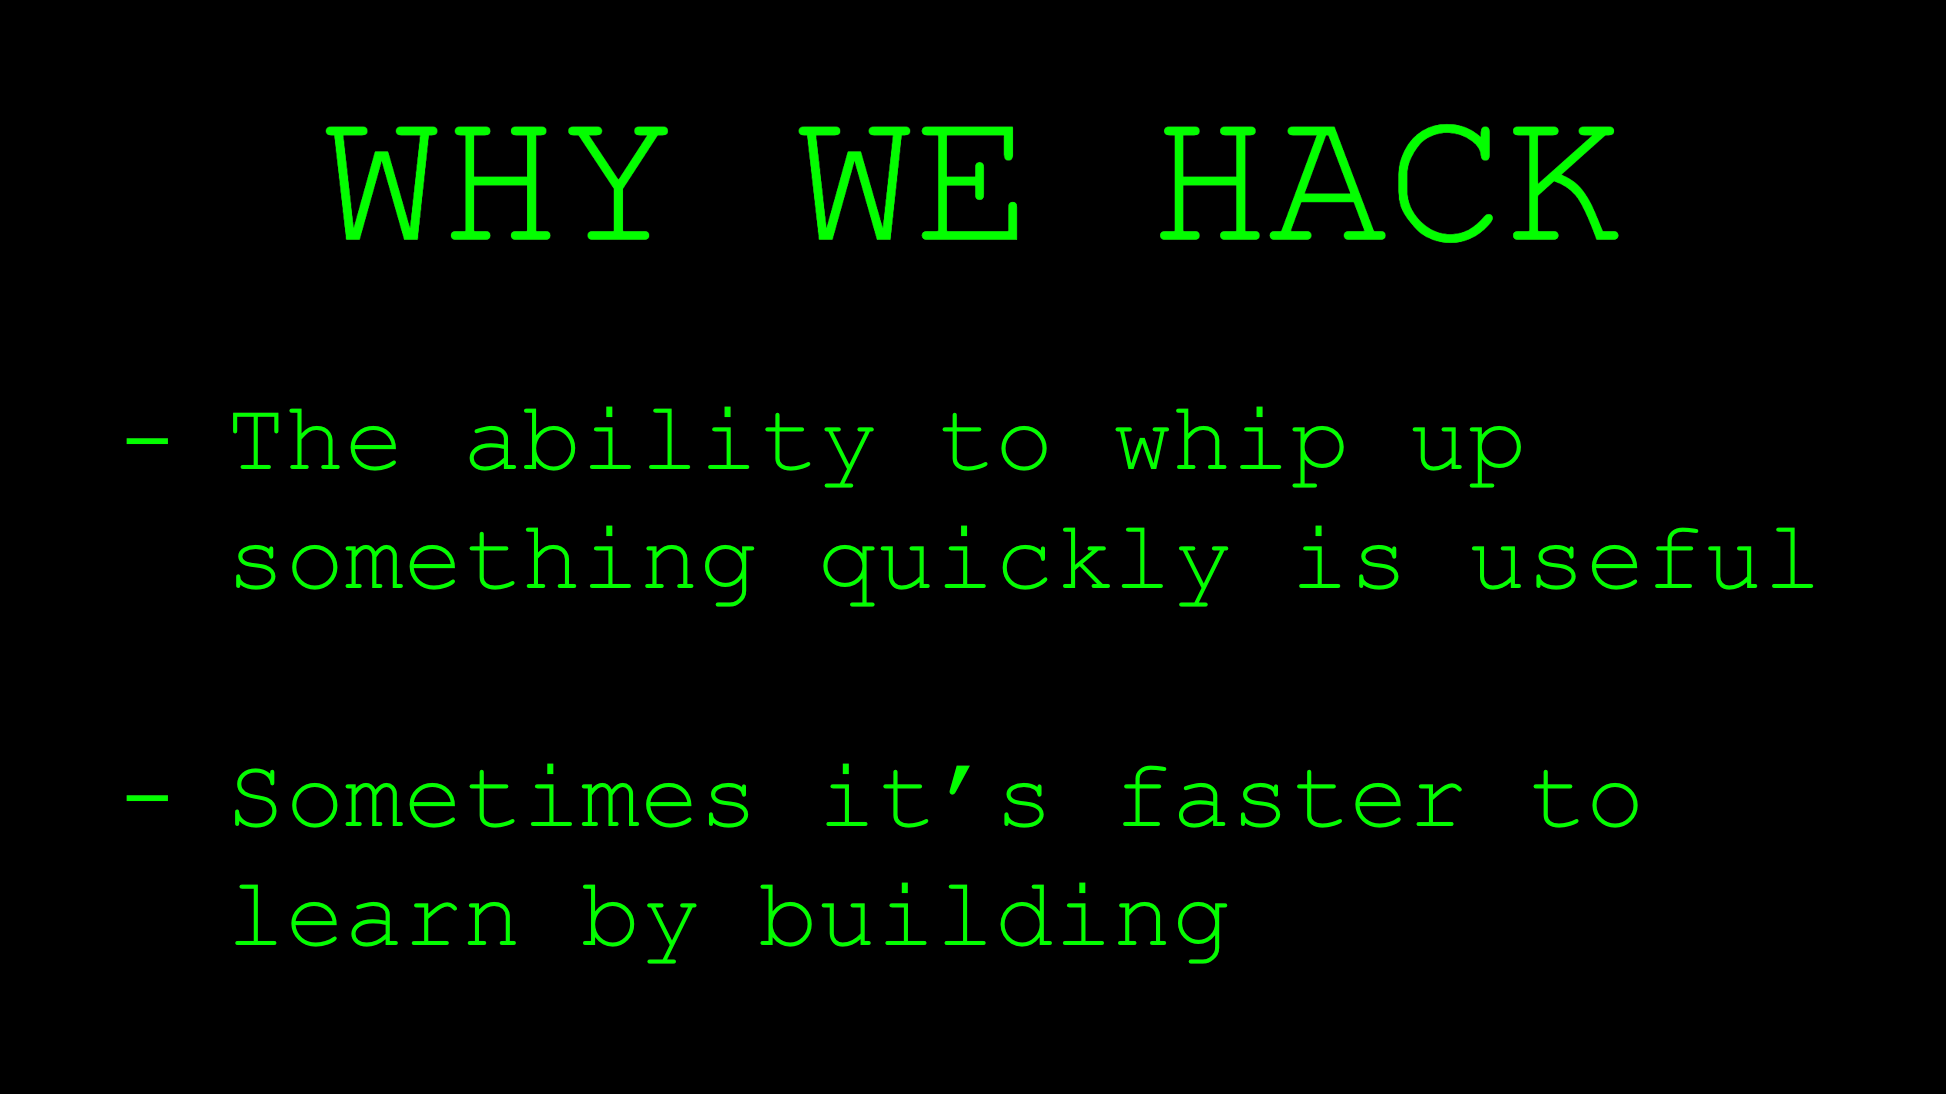 Why we hack: The ability to whip up something quickly is useful; Sometimes it's faster to learn by building